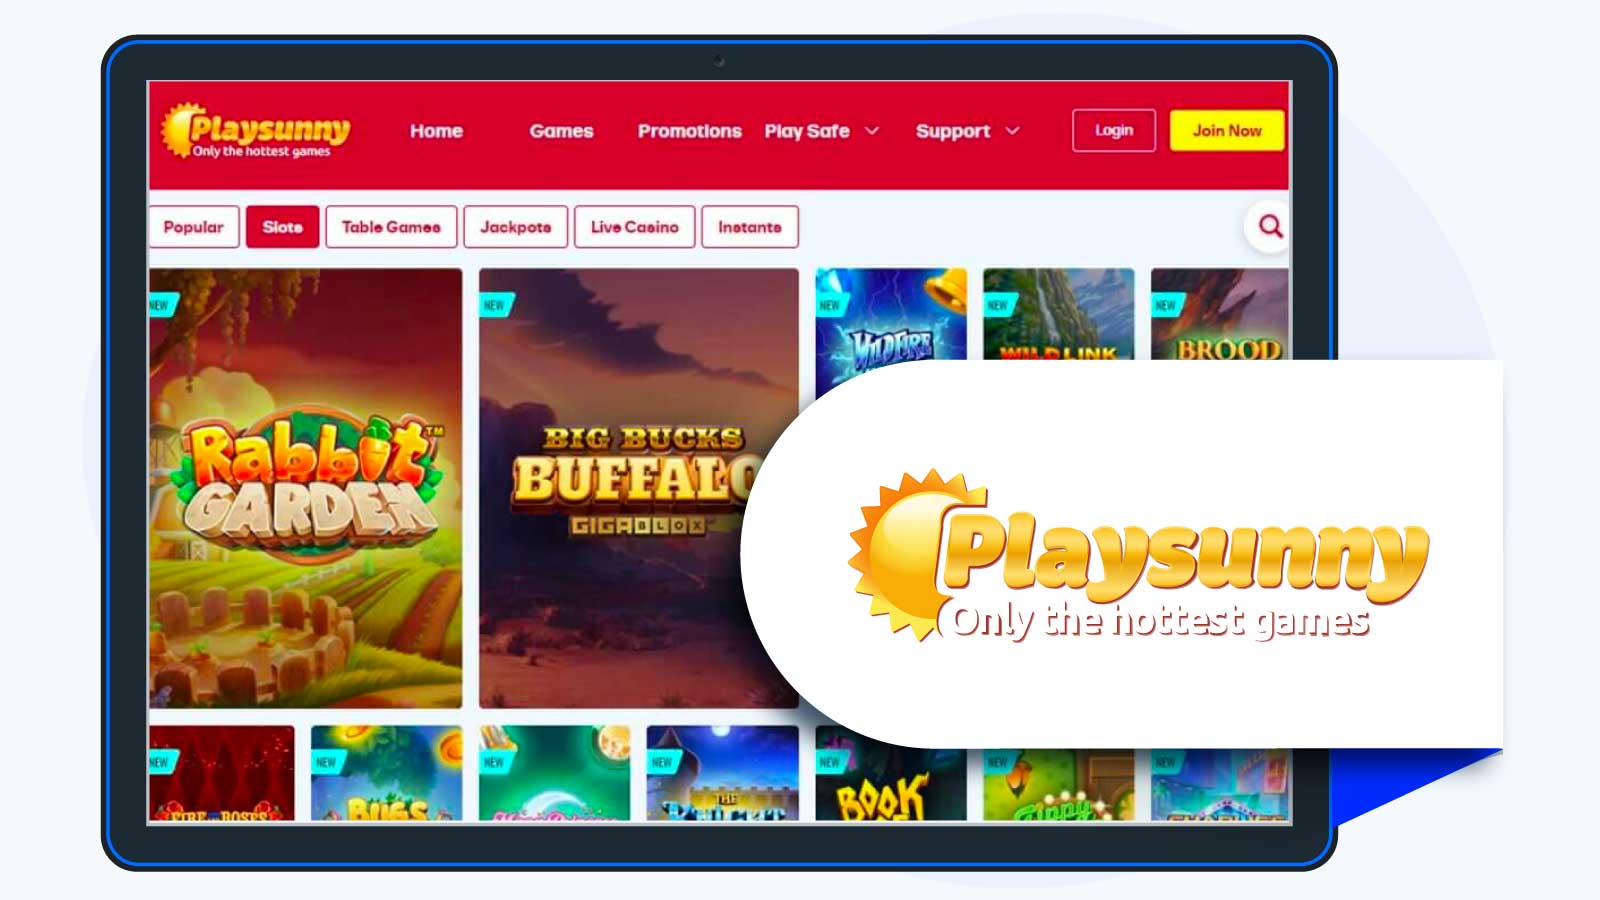 Playsunny Casino – Best for New Slots Fans